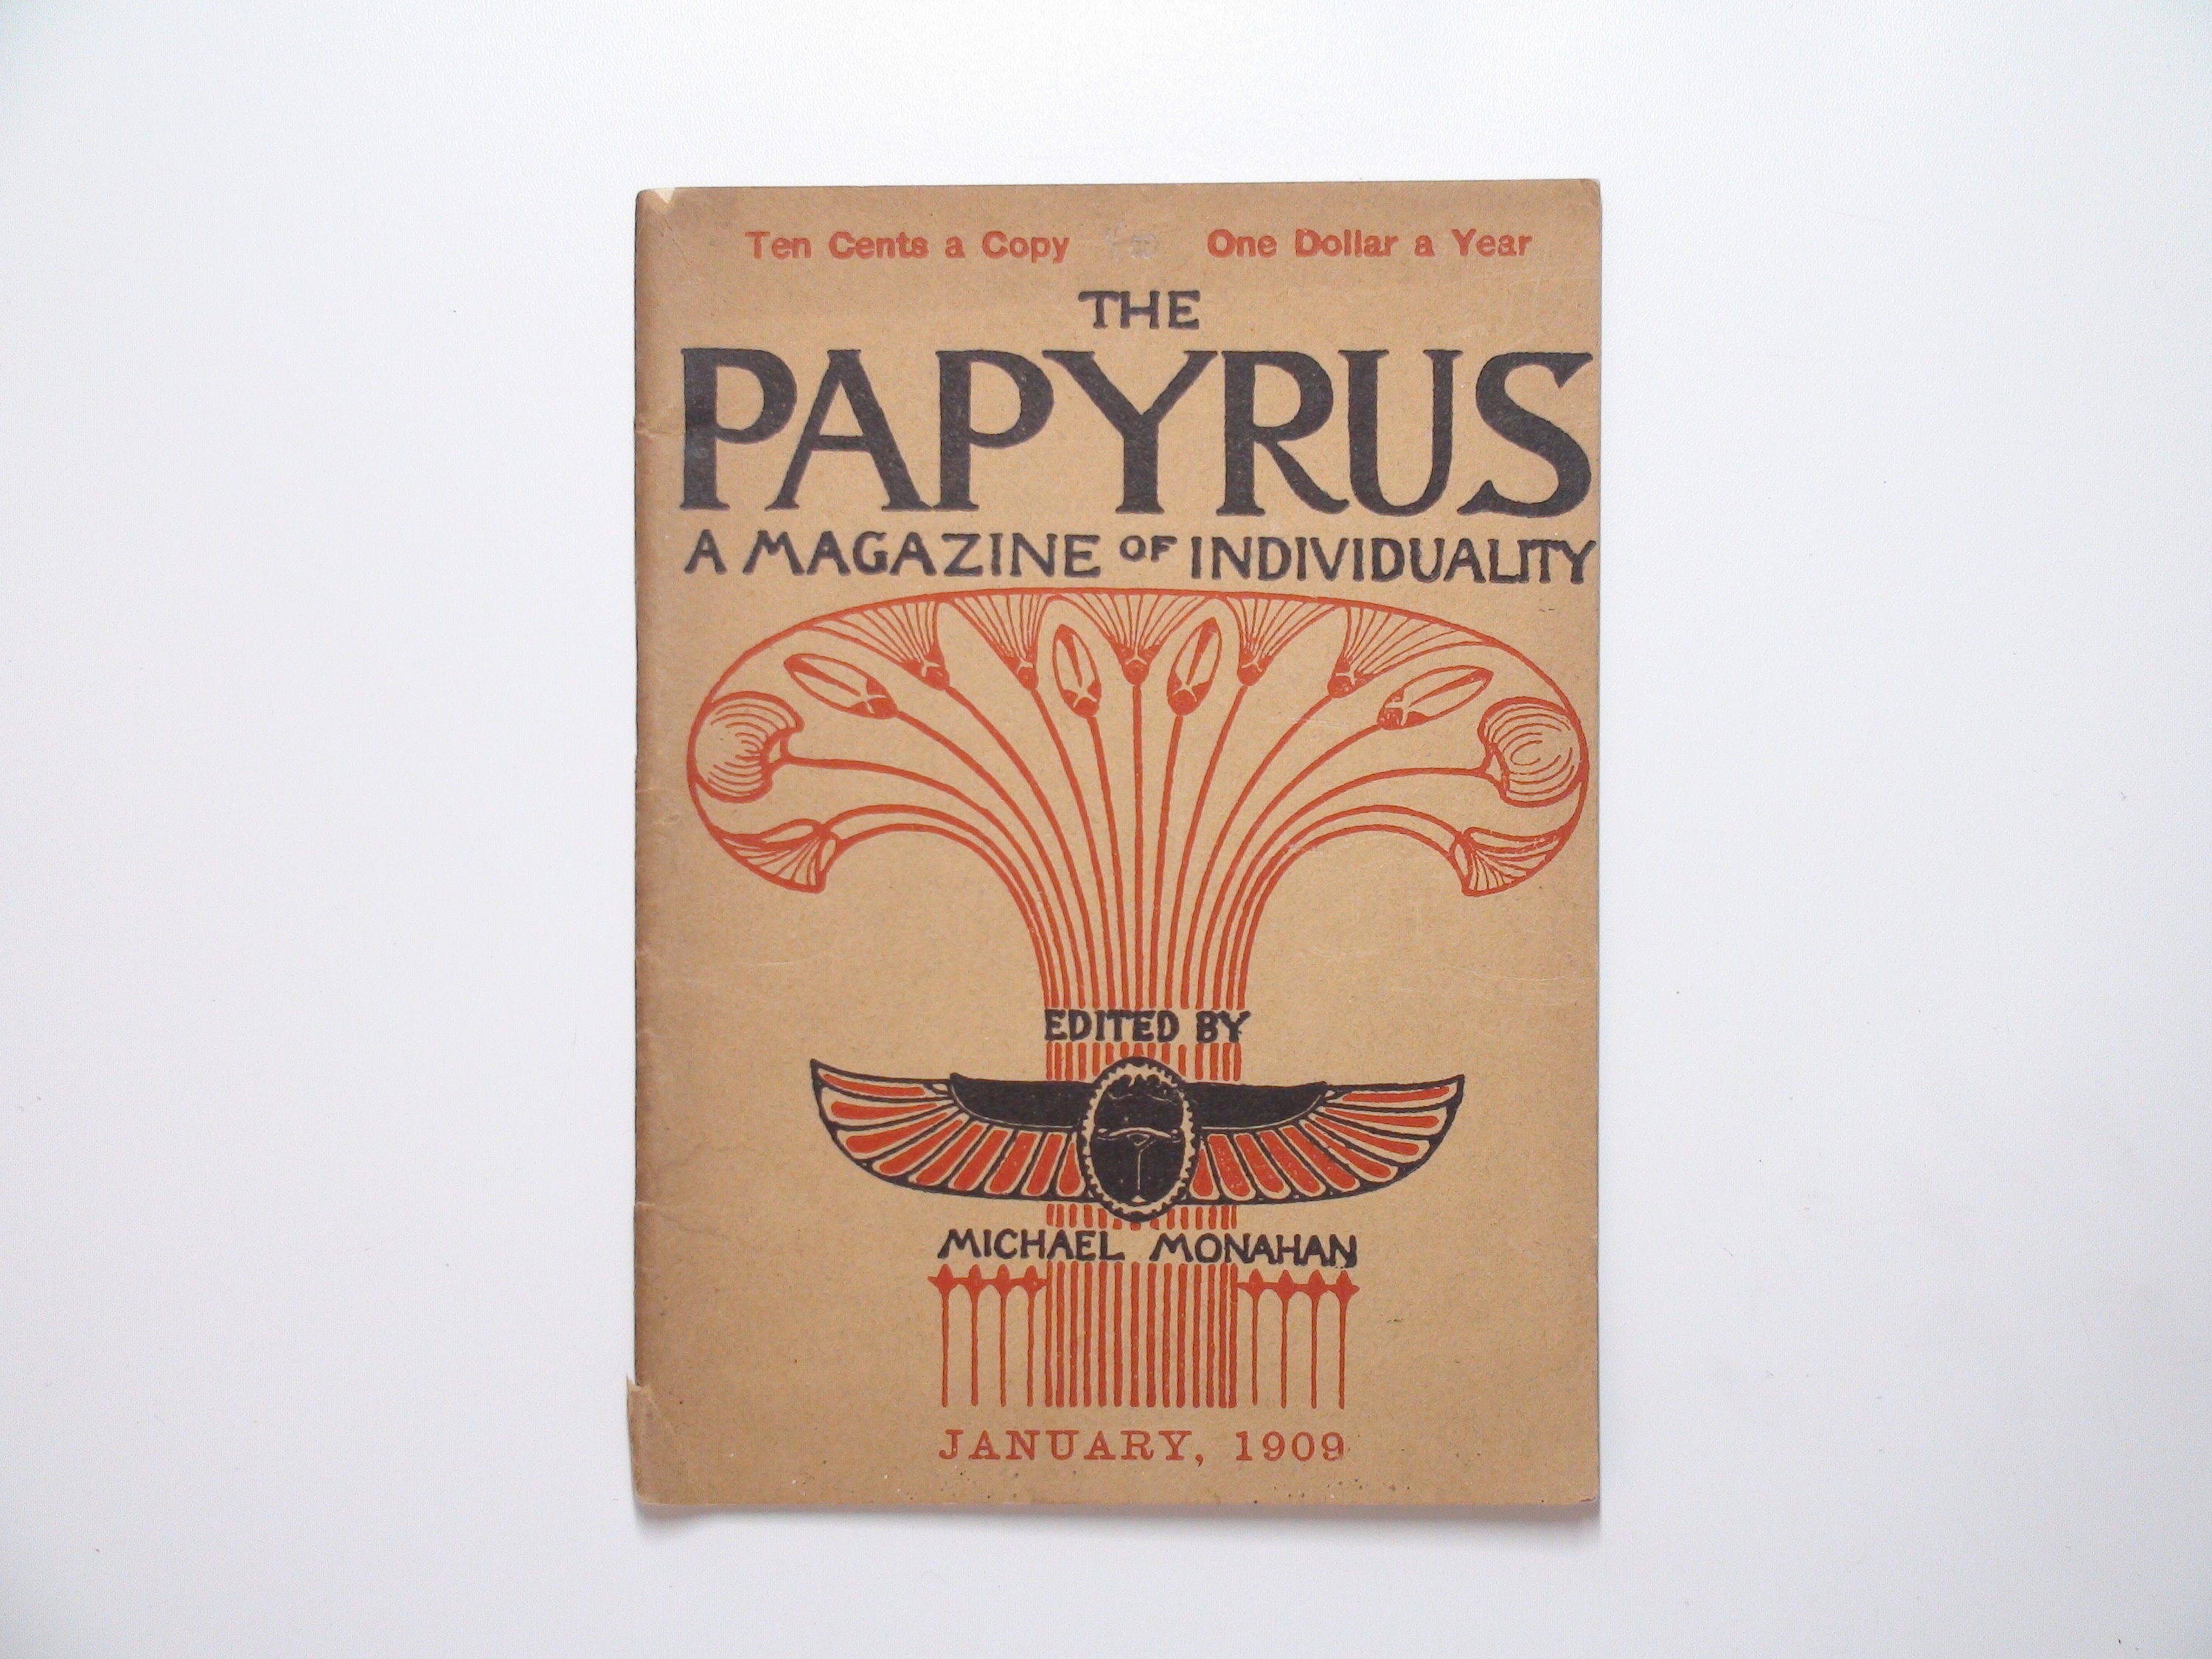 The Papyrus Magazine, Ed. by Michael Monahan, RARE, 1st Ed, January 1909